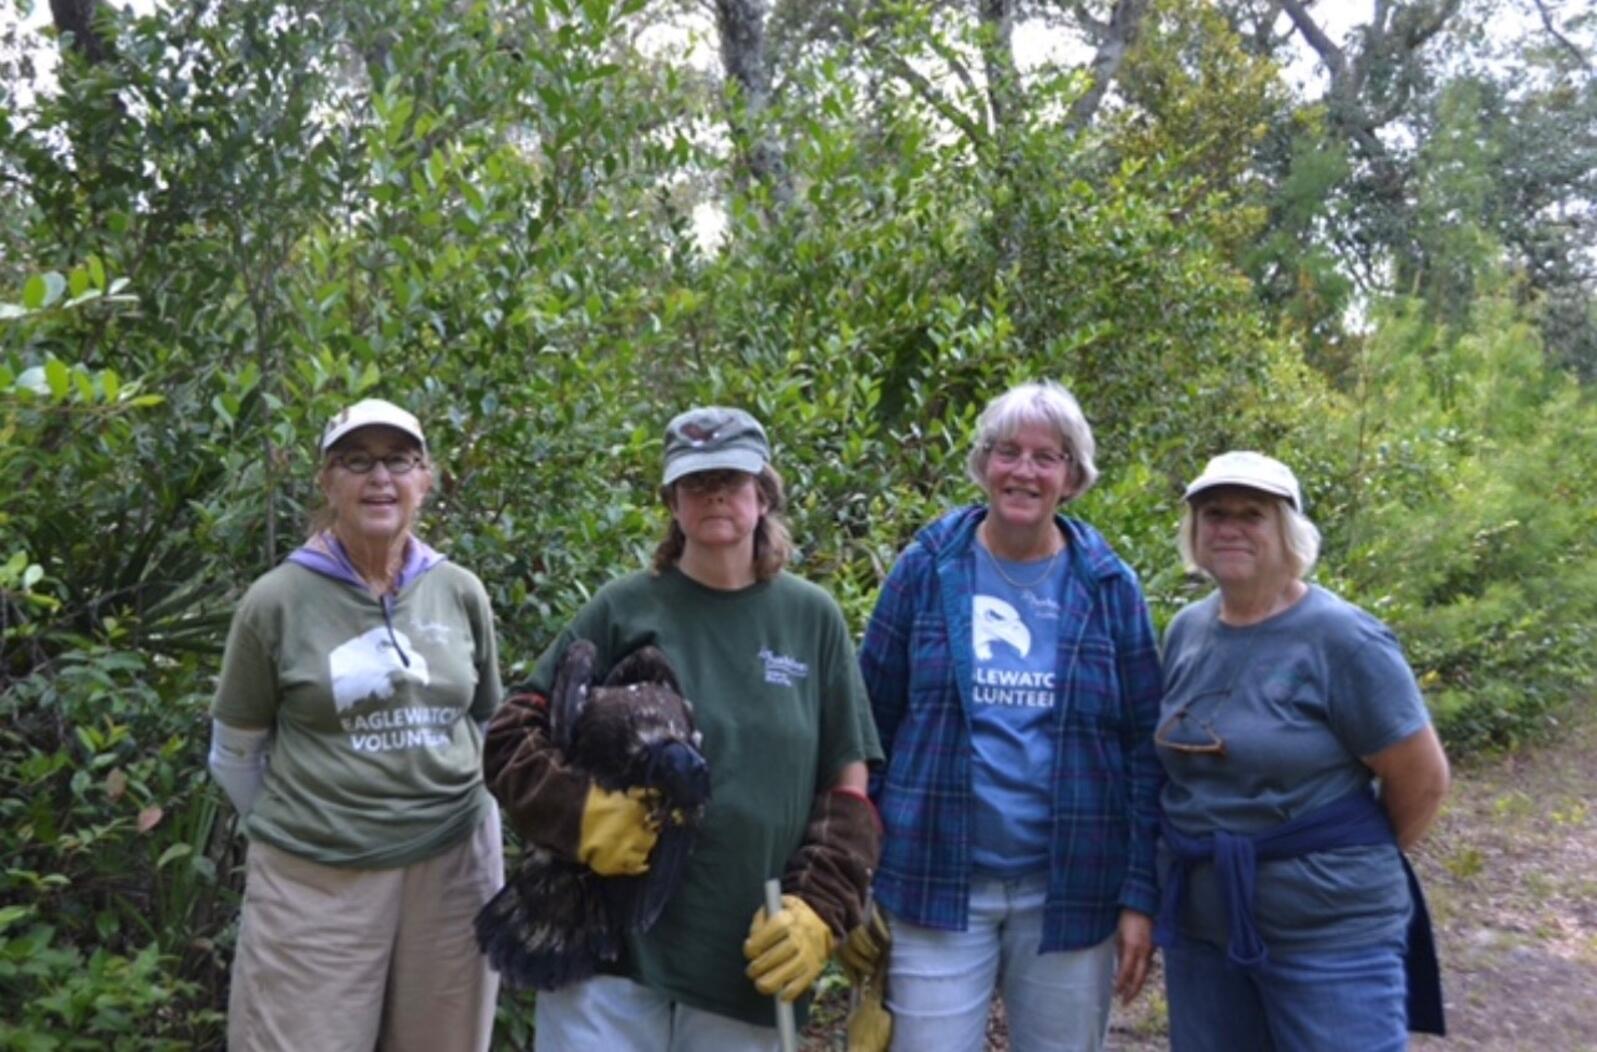 Four women stand in a line and pose for a photo in the woods. The second woman from the left is holding a hooded Bald Eagle under one arm.